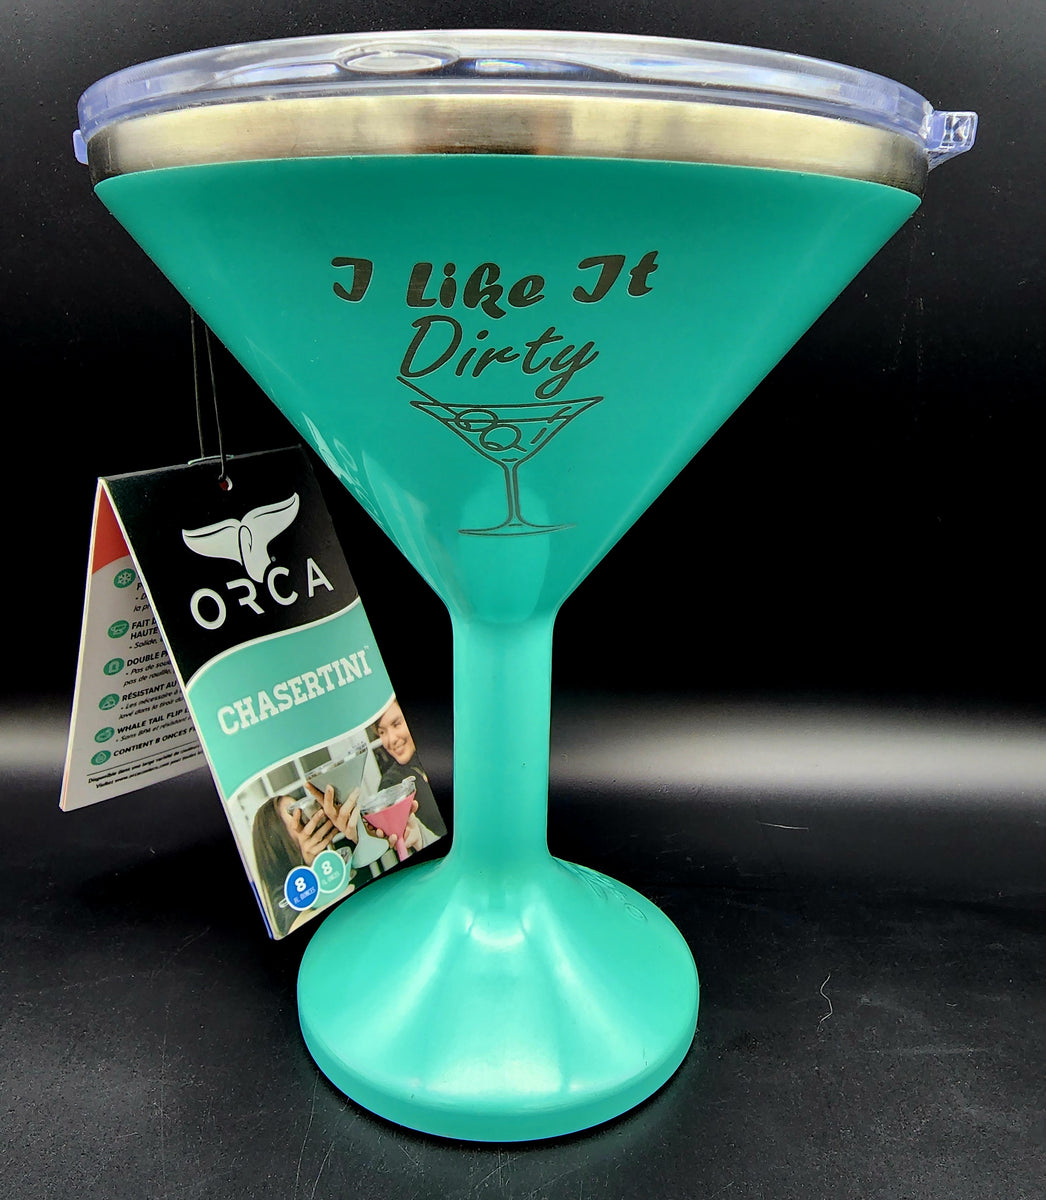 ORCA Coolers Martini 8oz Stainless Drink Chasertini Like Yeti Pair